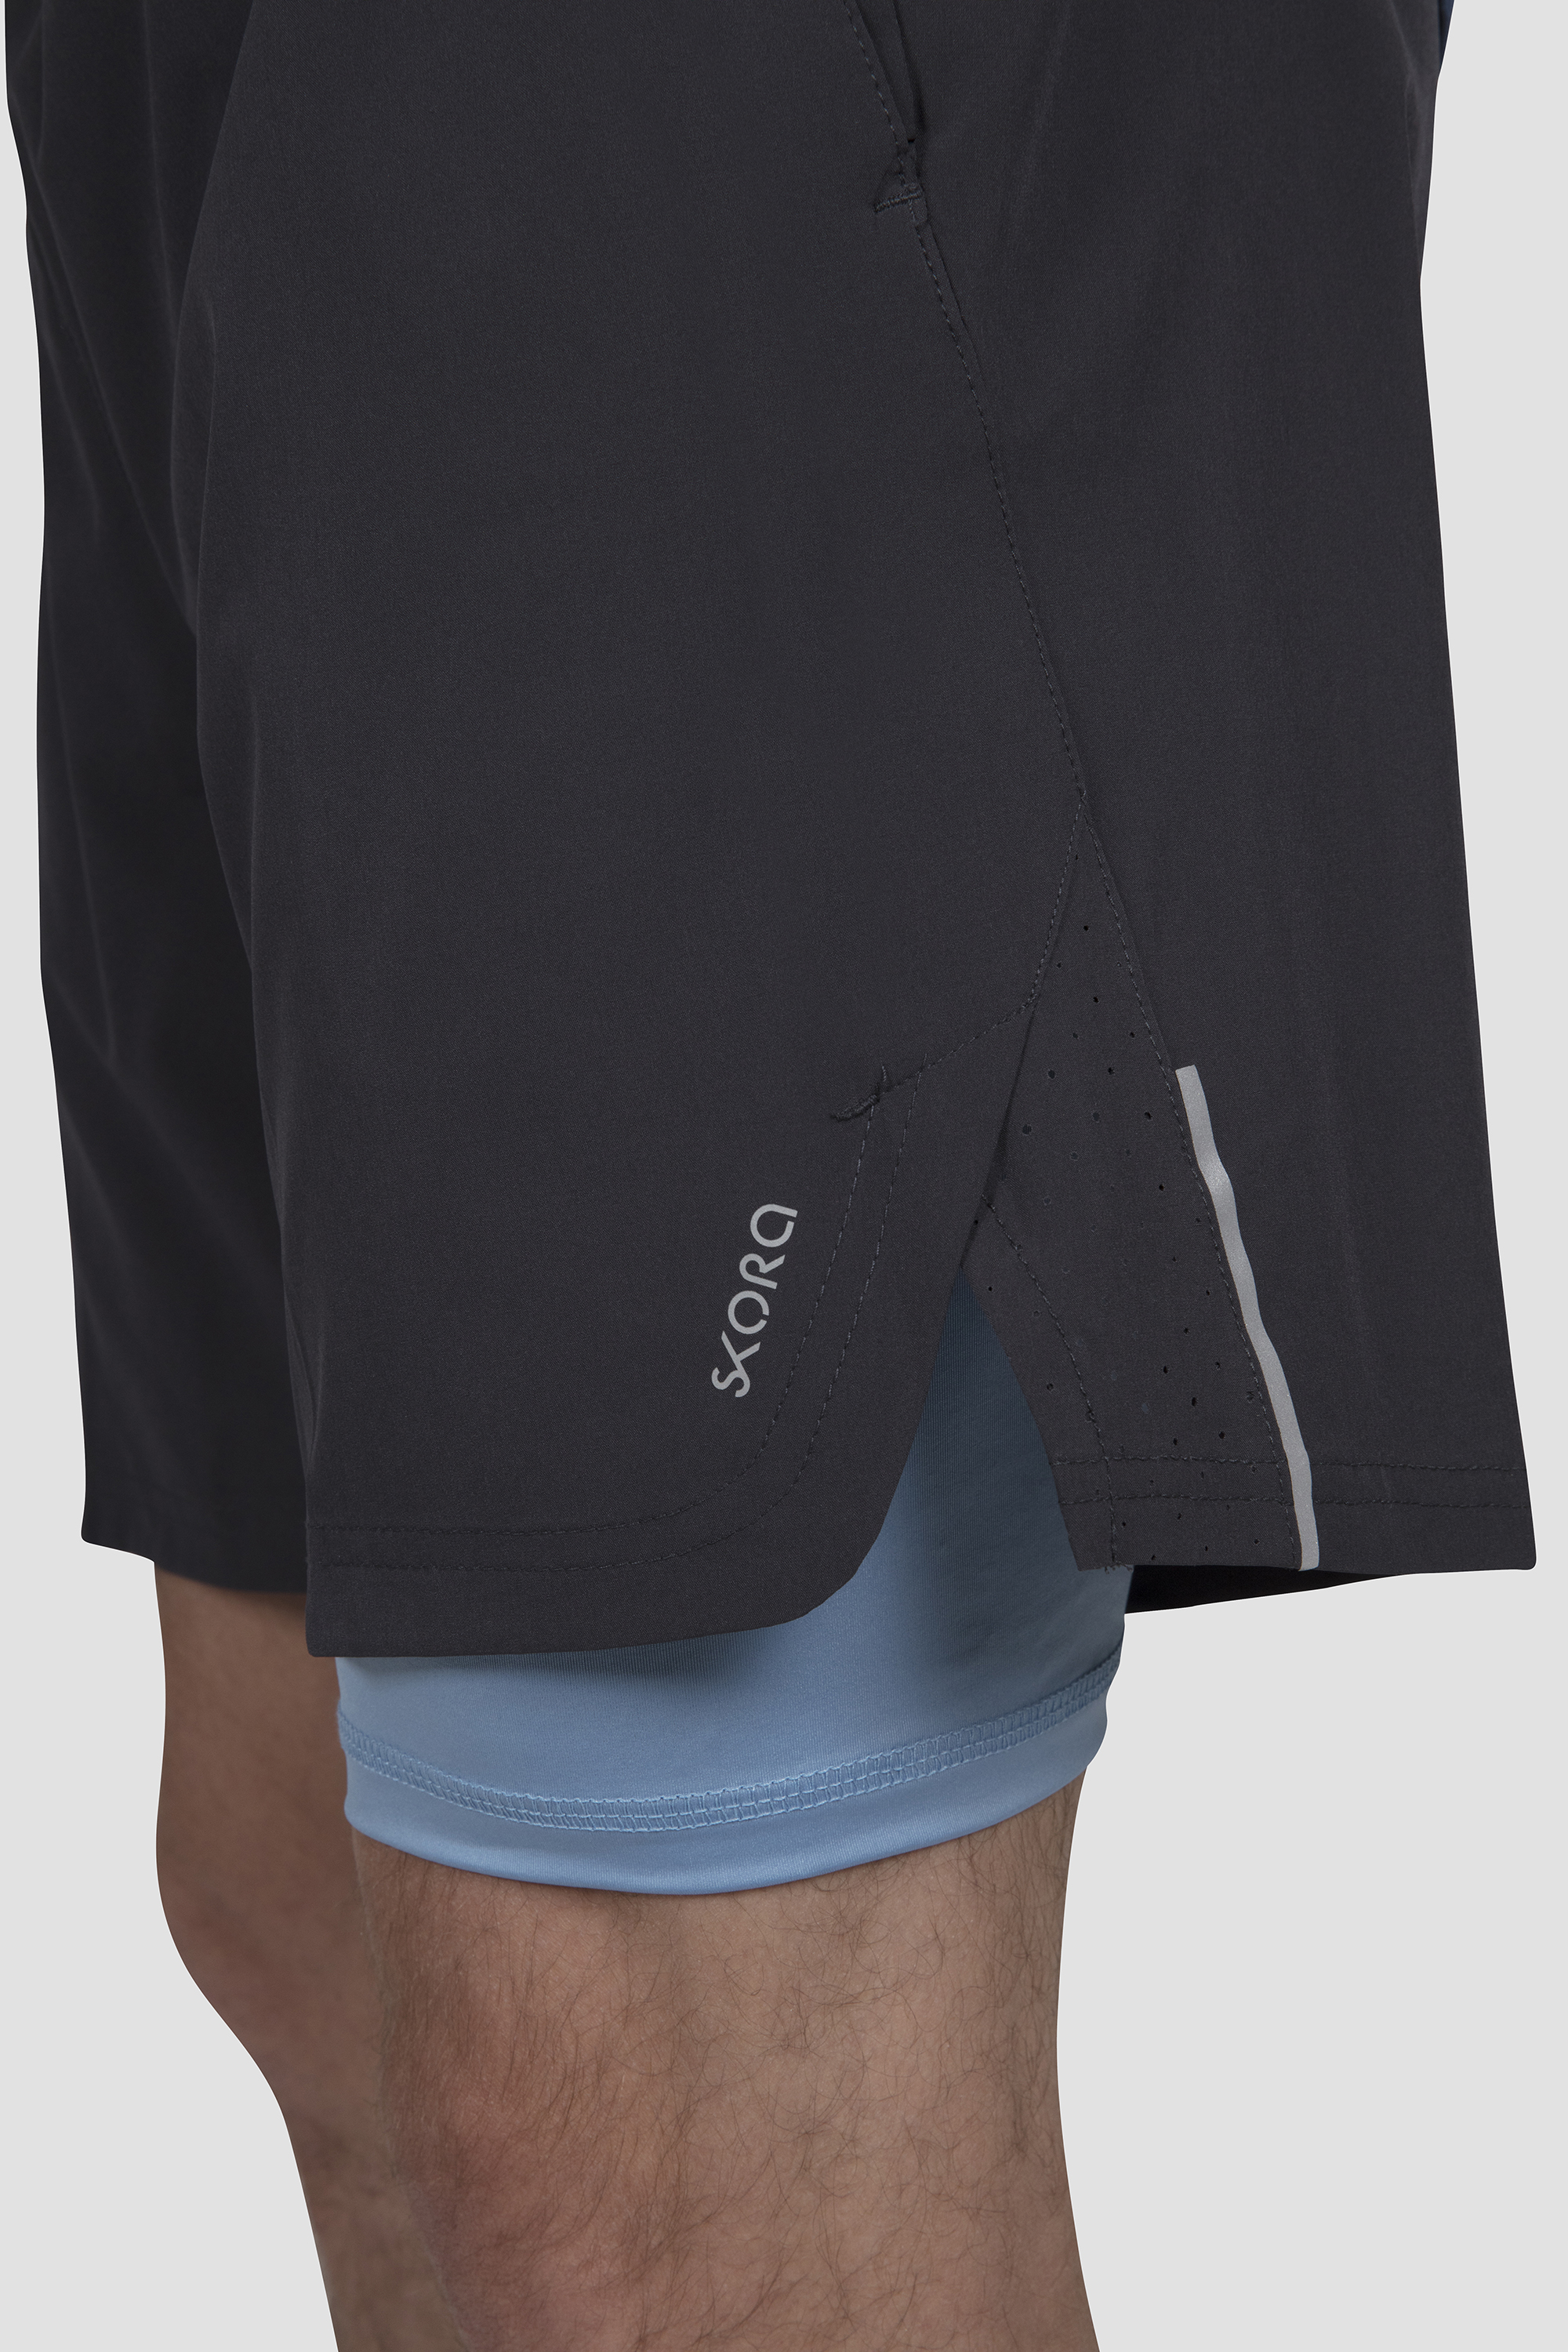 SKORA 7" Men's Athletic Woven Stretch Shorts with Built-In-Compression New Rare 